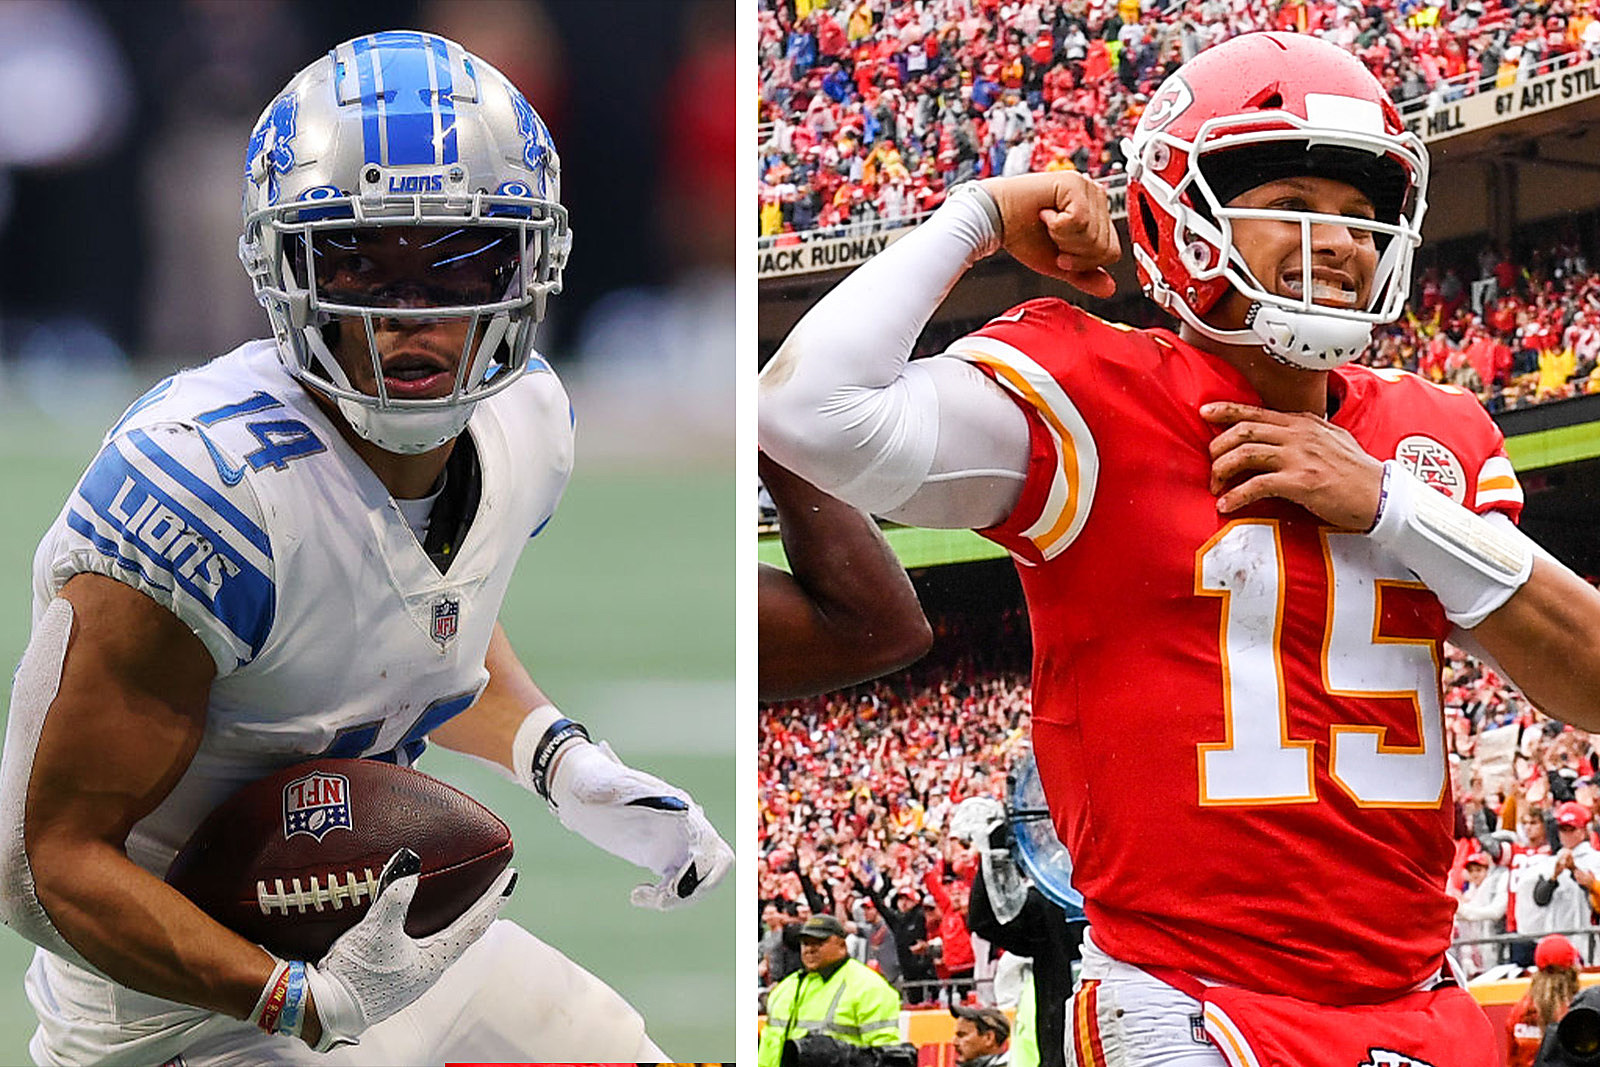 Detroit Lions vs Kansas City Chiefs: times, how to watch on TV